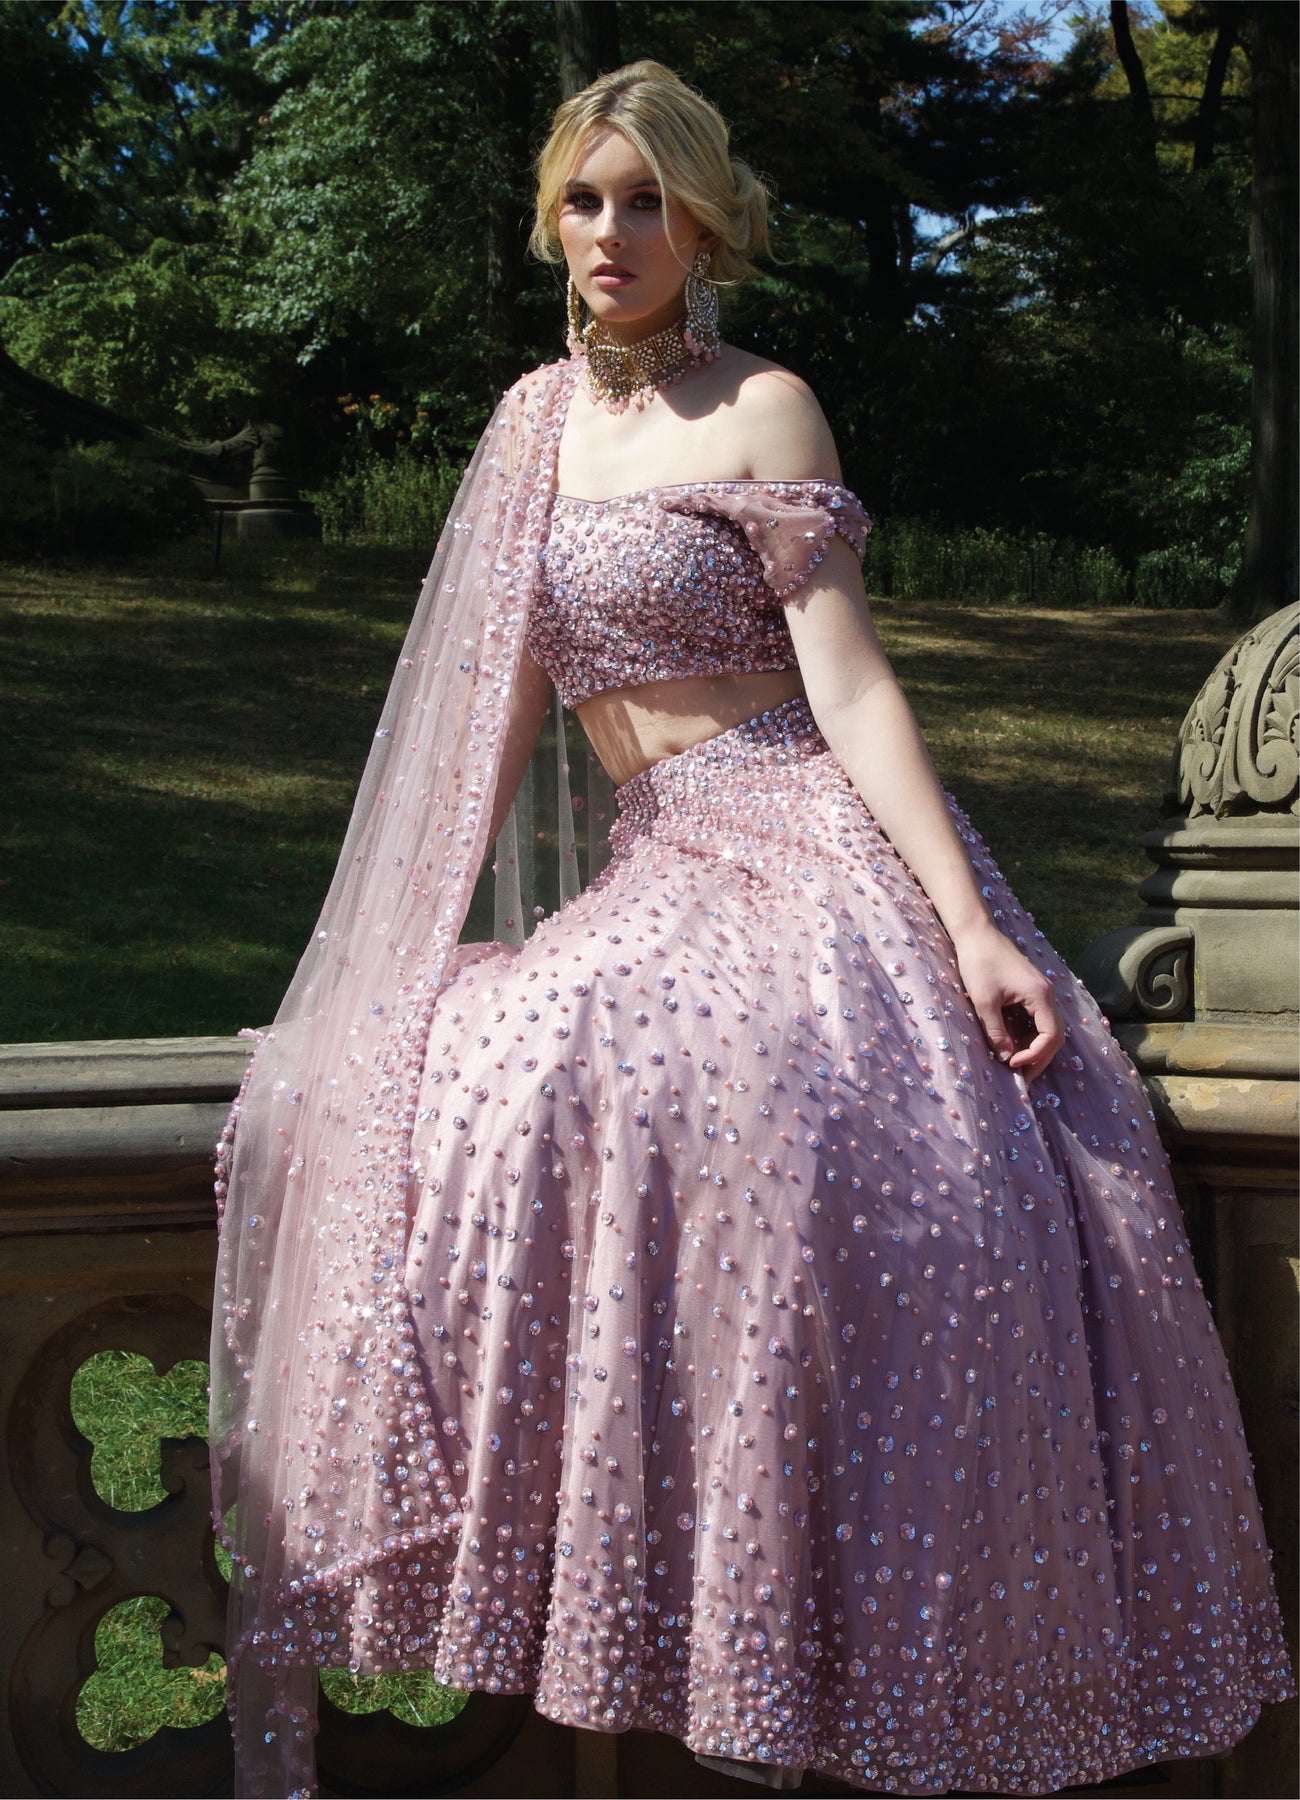 Ultra modern off the shoulder lehenga #indianfashion #indianclothing |  Haute couture, Couture